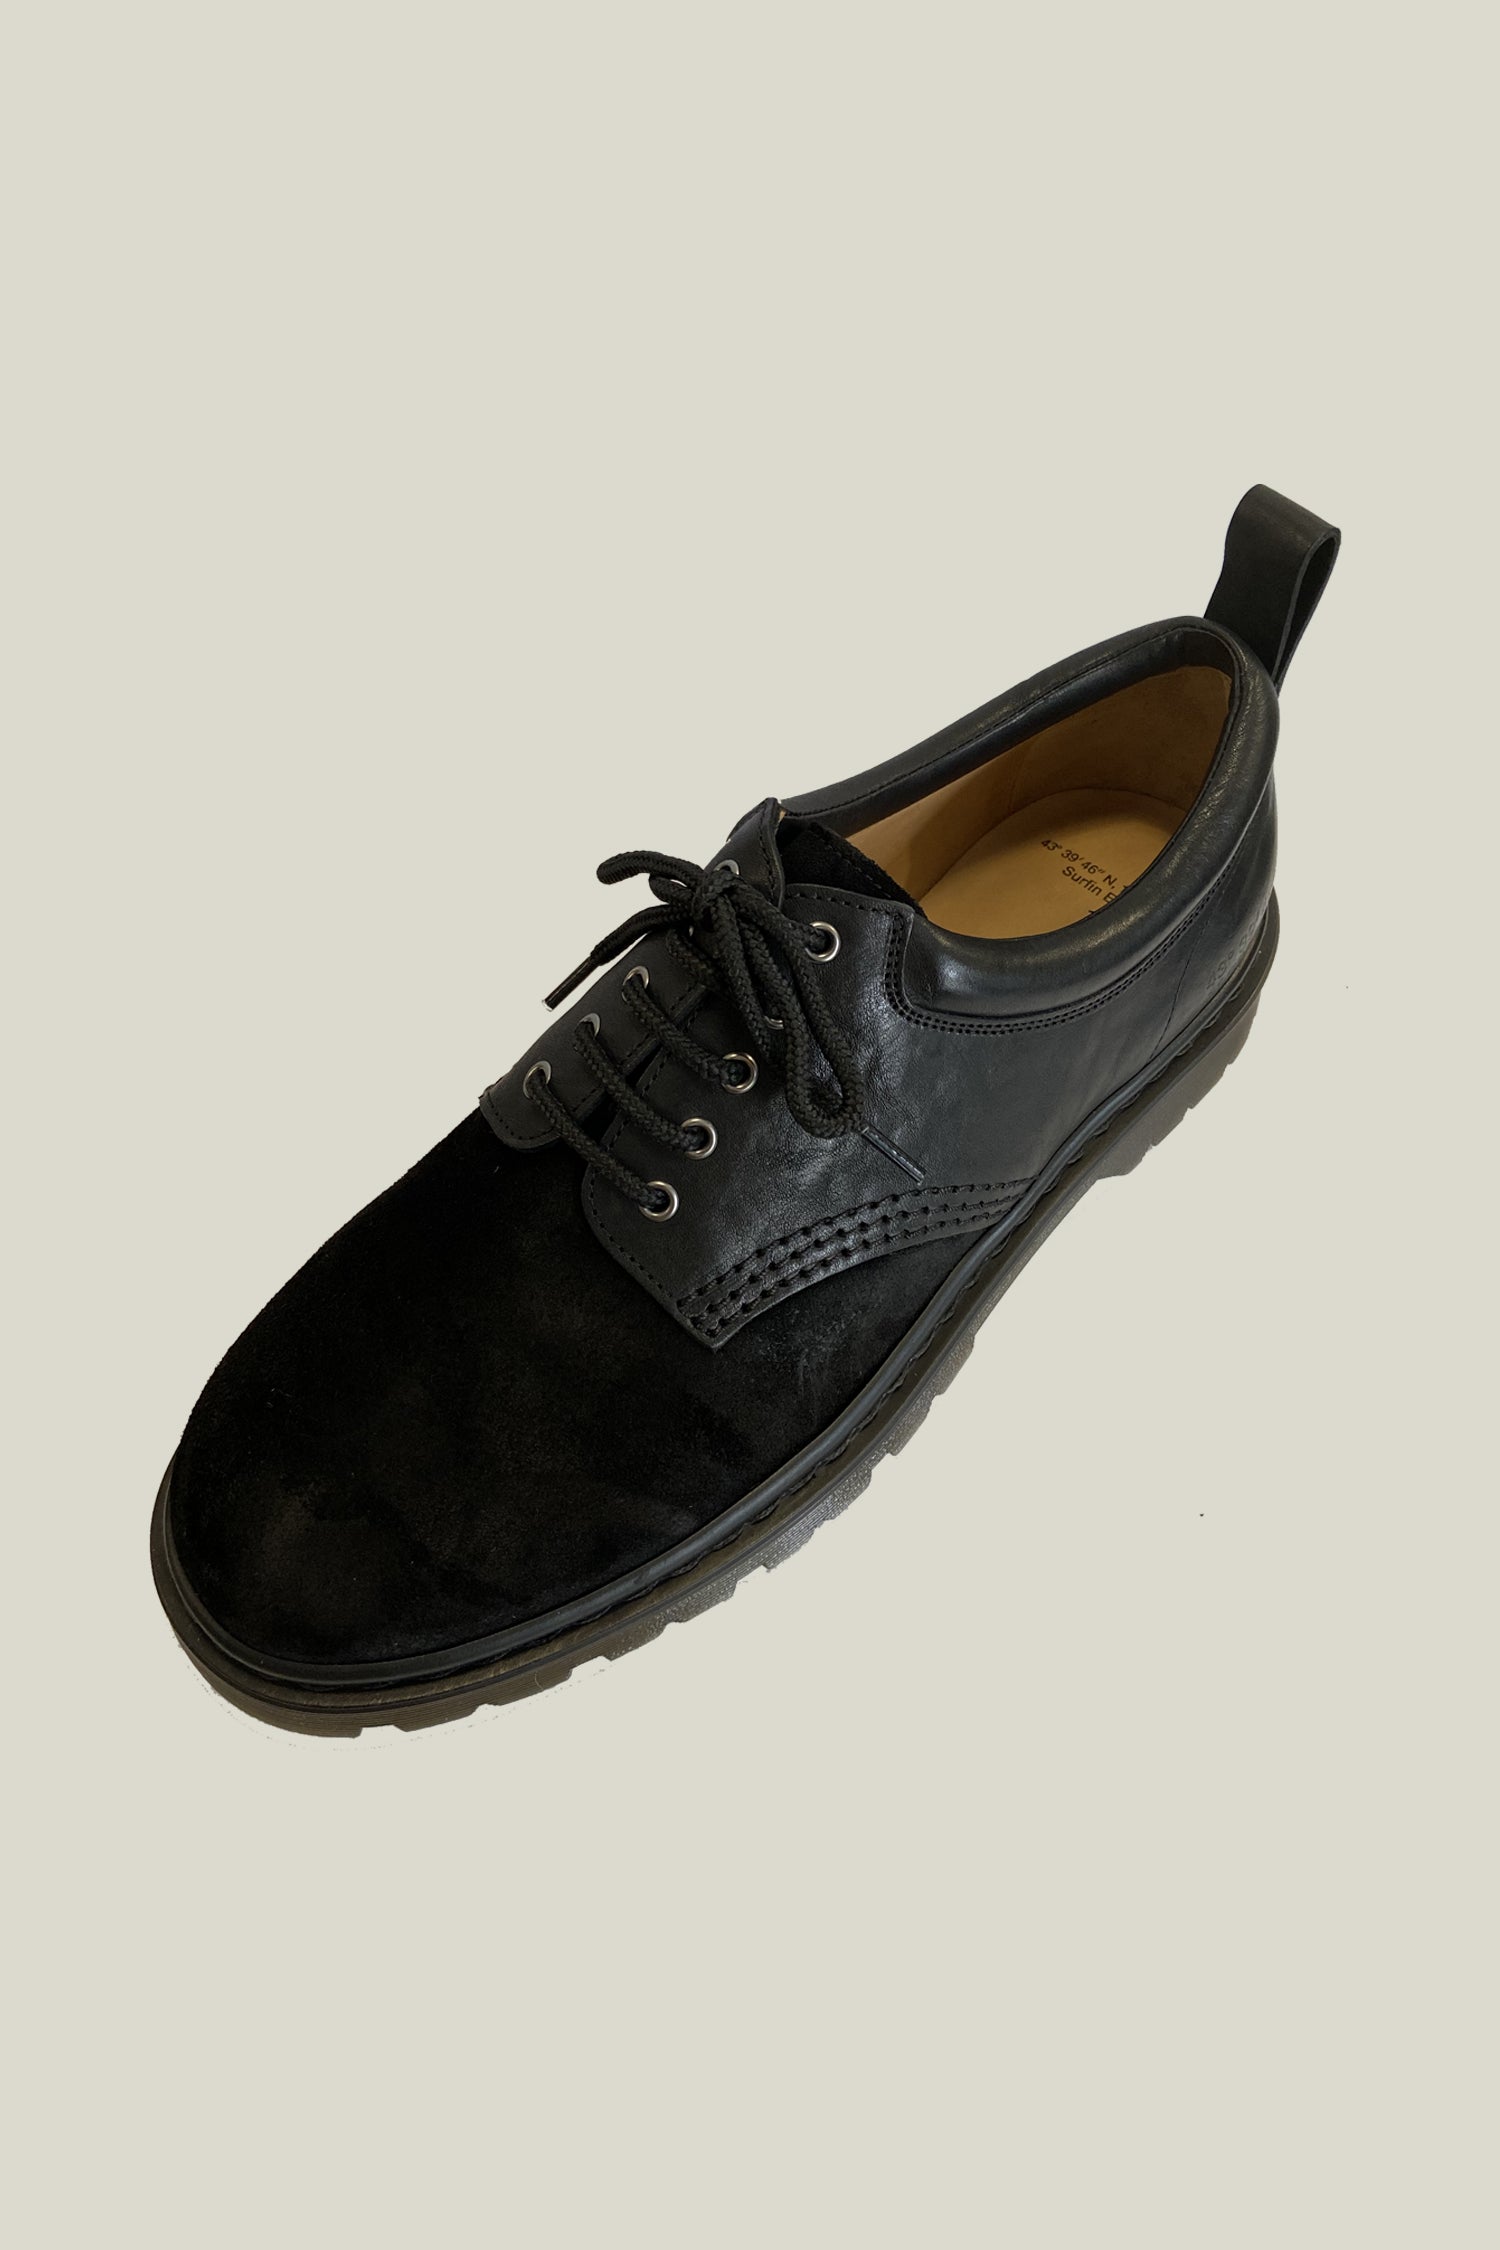 Our "Patrol" model is a robust lace-up shoe, made of leather with a spiked sole, color black.